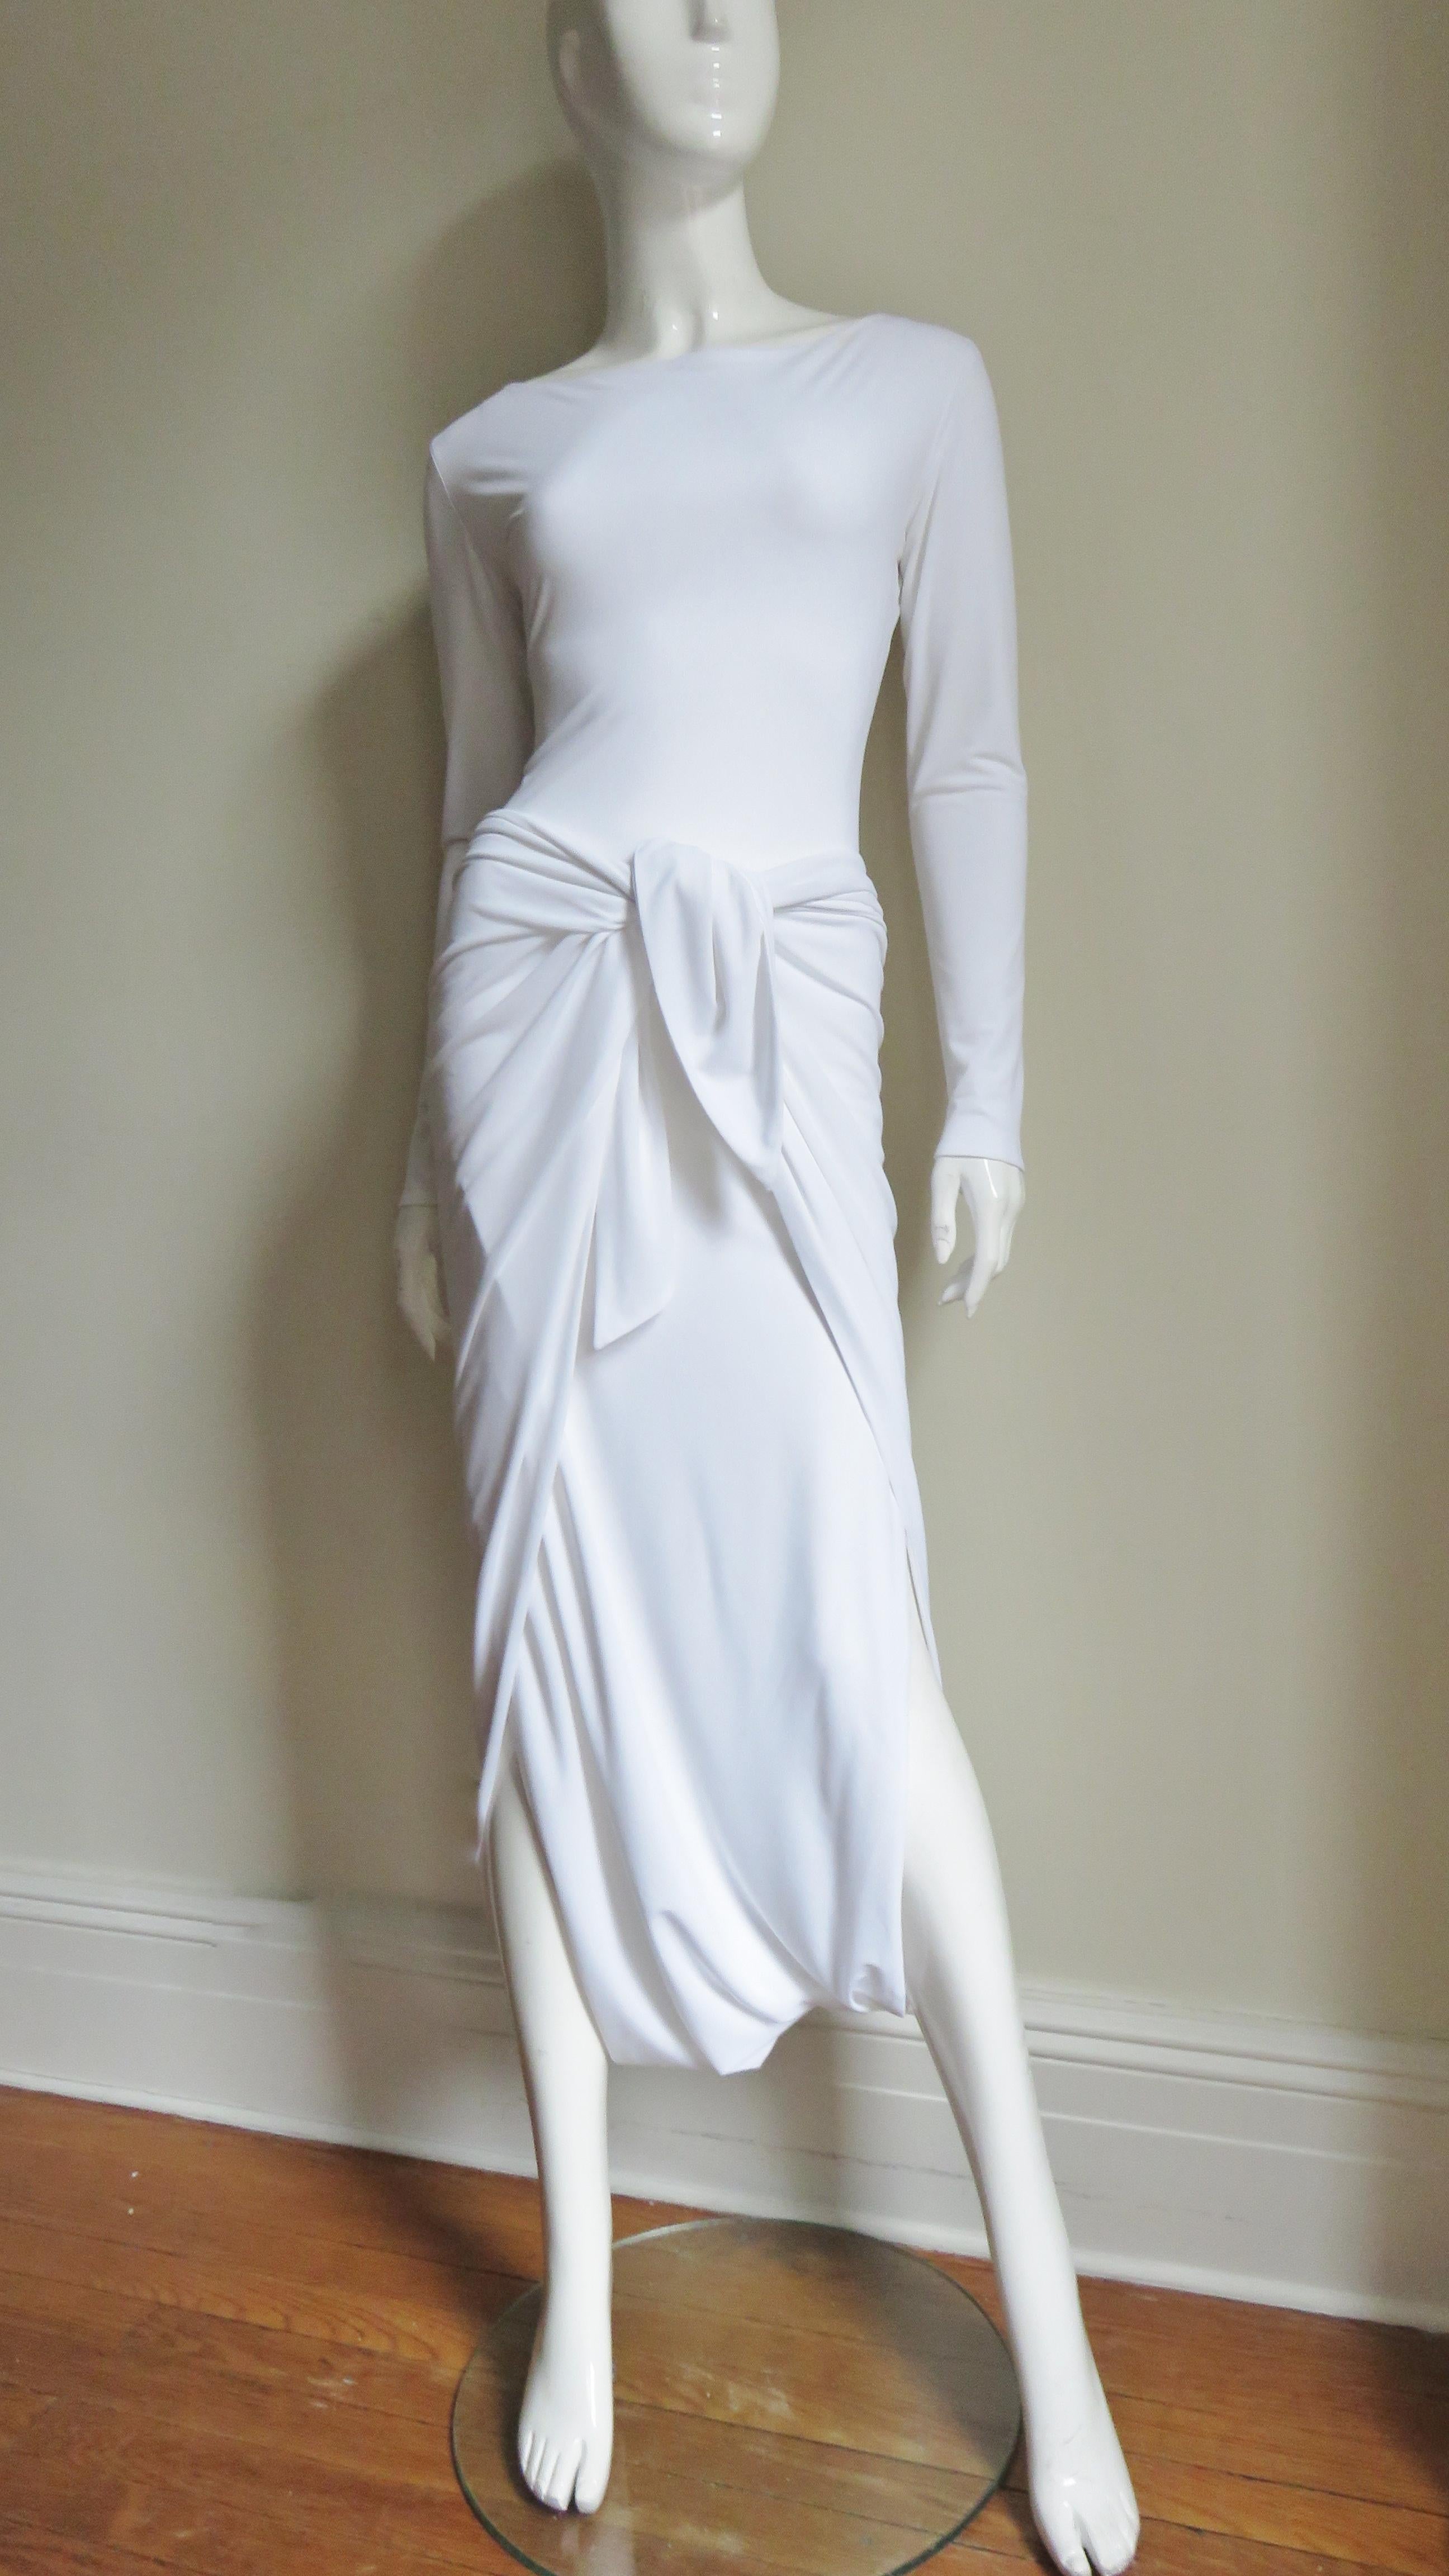 A fabulous unique white silk jersey dress from Norma Kamali.  It Has long sleeves, a bateau neckline and is semi fitted through the waist via a long front panel that drapes in front then between the legs wrapping at the back hips the corners tying